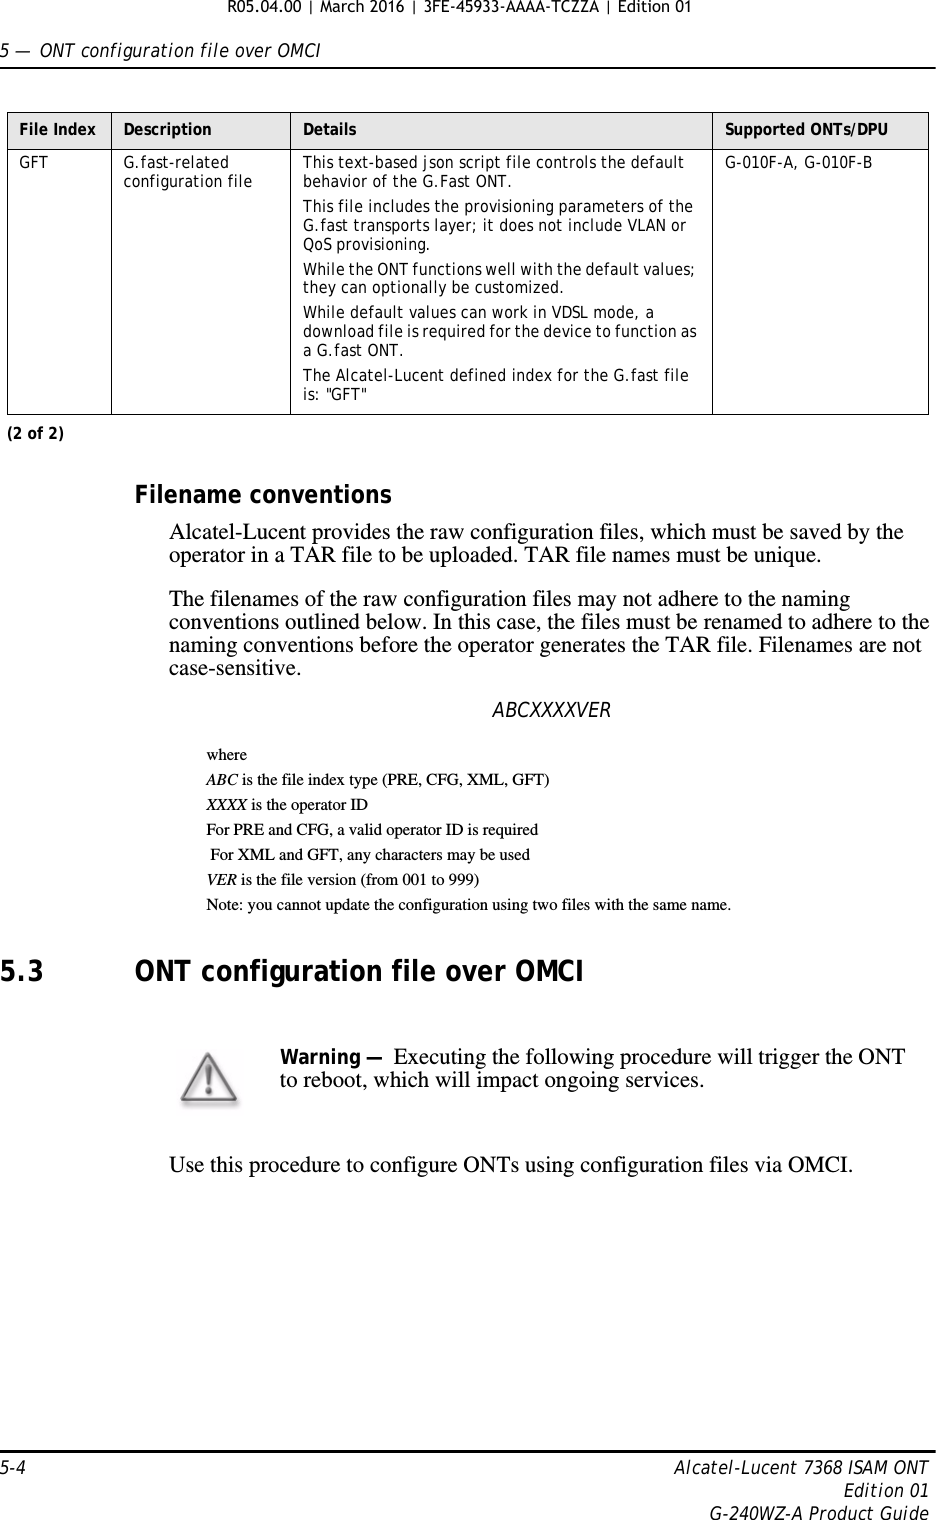 5 —  ONT configuration file over OMCI5-4 Alcatel-Lucent 7368 ISAM ONTEdition 01G-240WZ-A Product GuideFilename conventionsAlcatel-Lucent provides the raw configuration files, which must be saved by the operator in a TAR file to be uploaded. TAR file names must be unique.The filenames of the raw configuration files may not adhere to the naming conventions outlined below. In this case, the files must be renamed to adhere to the naming conventions before the operator generates the TAR file. Filenames are not case-sensitive.ABCXXXXVERwhereABC is the file index type (PRE, CFG, XML, GFT)XXXX is the operator IDFor PRE and CFG, a valid operator ID is required For XML and GFT, any characters may be usedVER is the file version (from 001 to 999) Note: you cannot update the configuration using two files with the same name.5.3 ONT configuration file over OMCIUse this procedure to configure ONTs using configuration files via OMCI.GFT G.fast-related configuration file This text-based json script file controls the default behavior of the G.Fast ONT. This file includes the provisioning parameters of the G.fast transports layer; it does not include VLAN or QoS provisioning. While the ONT functions well with the default values; they can optionally be customized. While default values can work in VDSL mode, a download file is required for the device to function as a G.fast ONT.The Alcatel-Lucent defined index for the G.fast file is: &quot;GFT&quot;G-010F-A, G-010F-BFile Index Description Details Supported ONTs/DPU(2 of 2)Warning —  Executing the following procedure will trigger the ONT to reboot, which will impact ongoing services.R05.04.00 | March 2016 | 3FE-45933-AAAA-TCZZA | Edition 01 